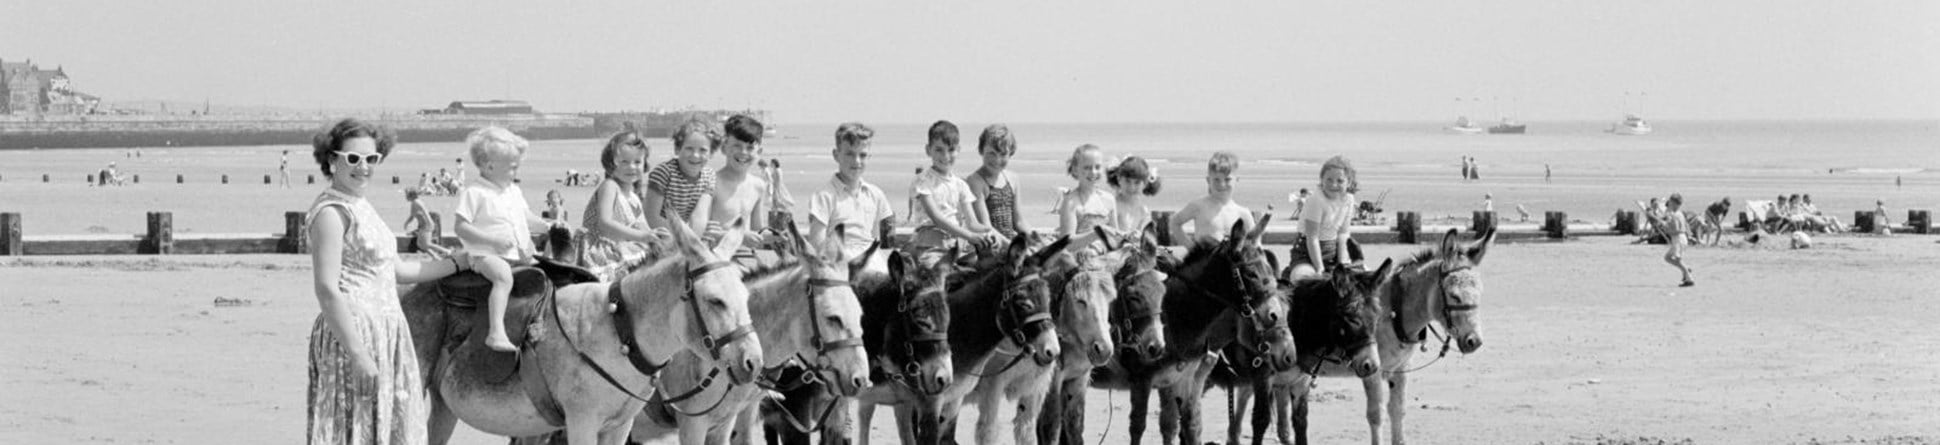 Children sitting on donkeys in a line on the beach at Bridlington